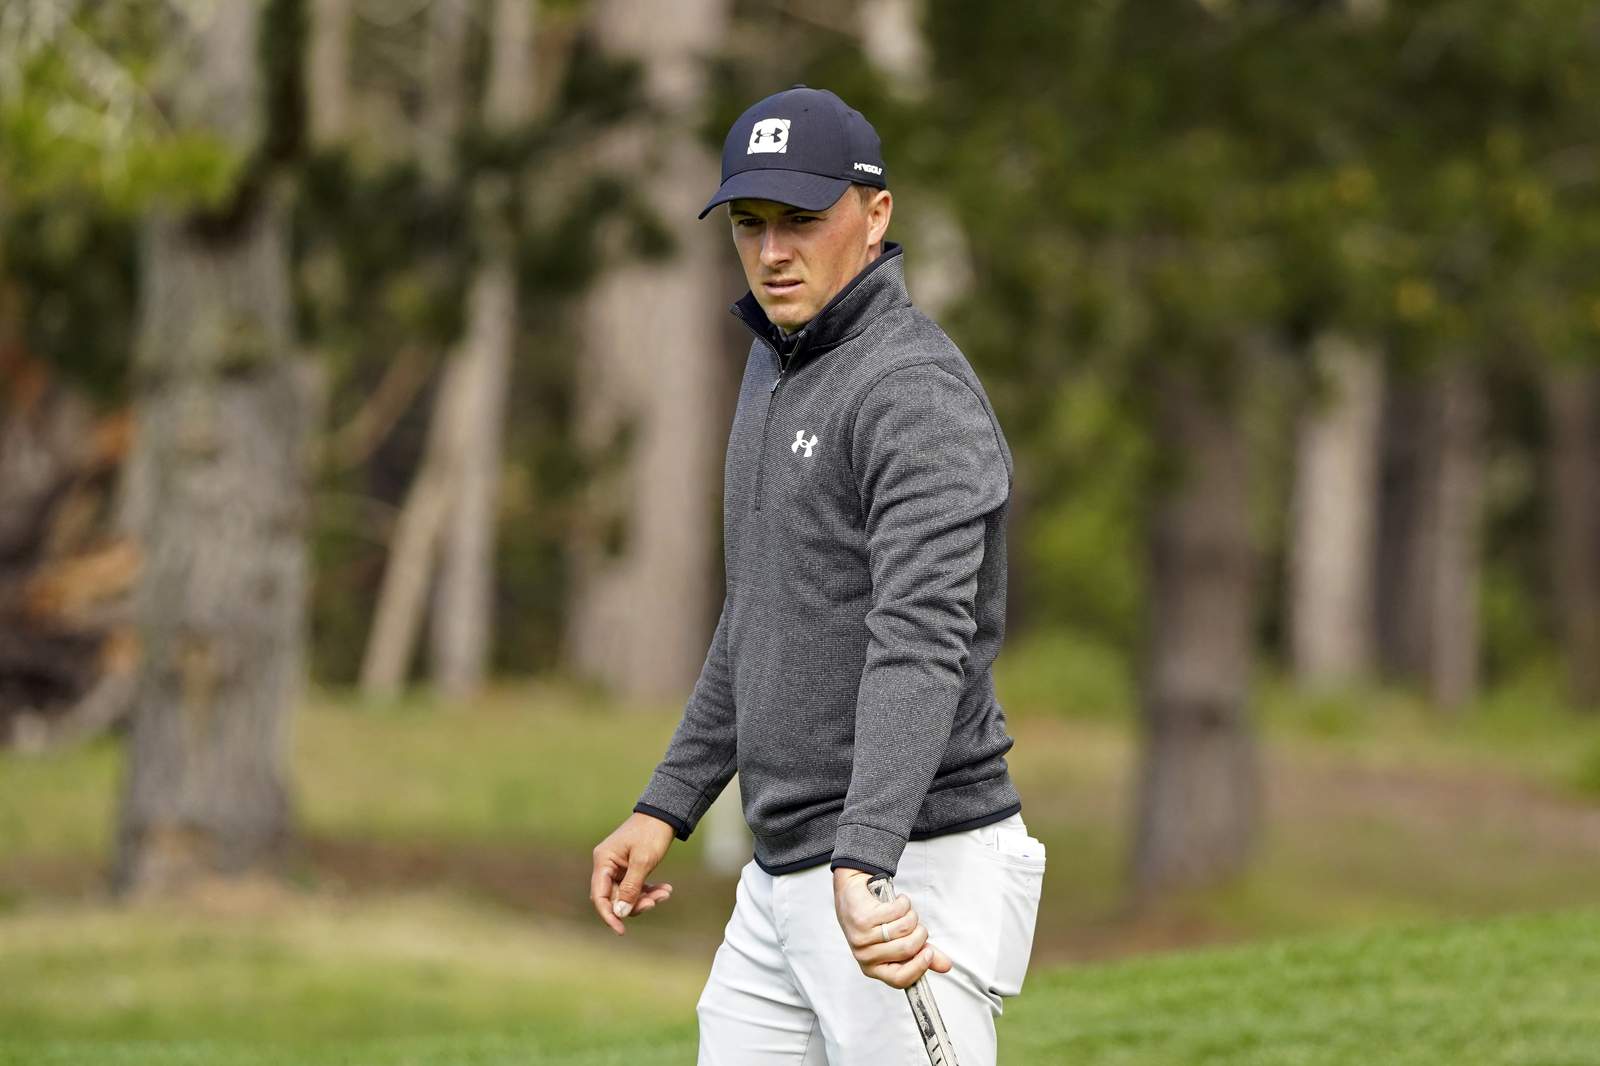 Spieth takes another step with a 67 to lead at Pebble Beach